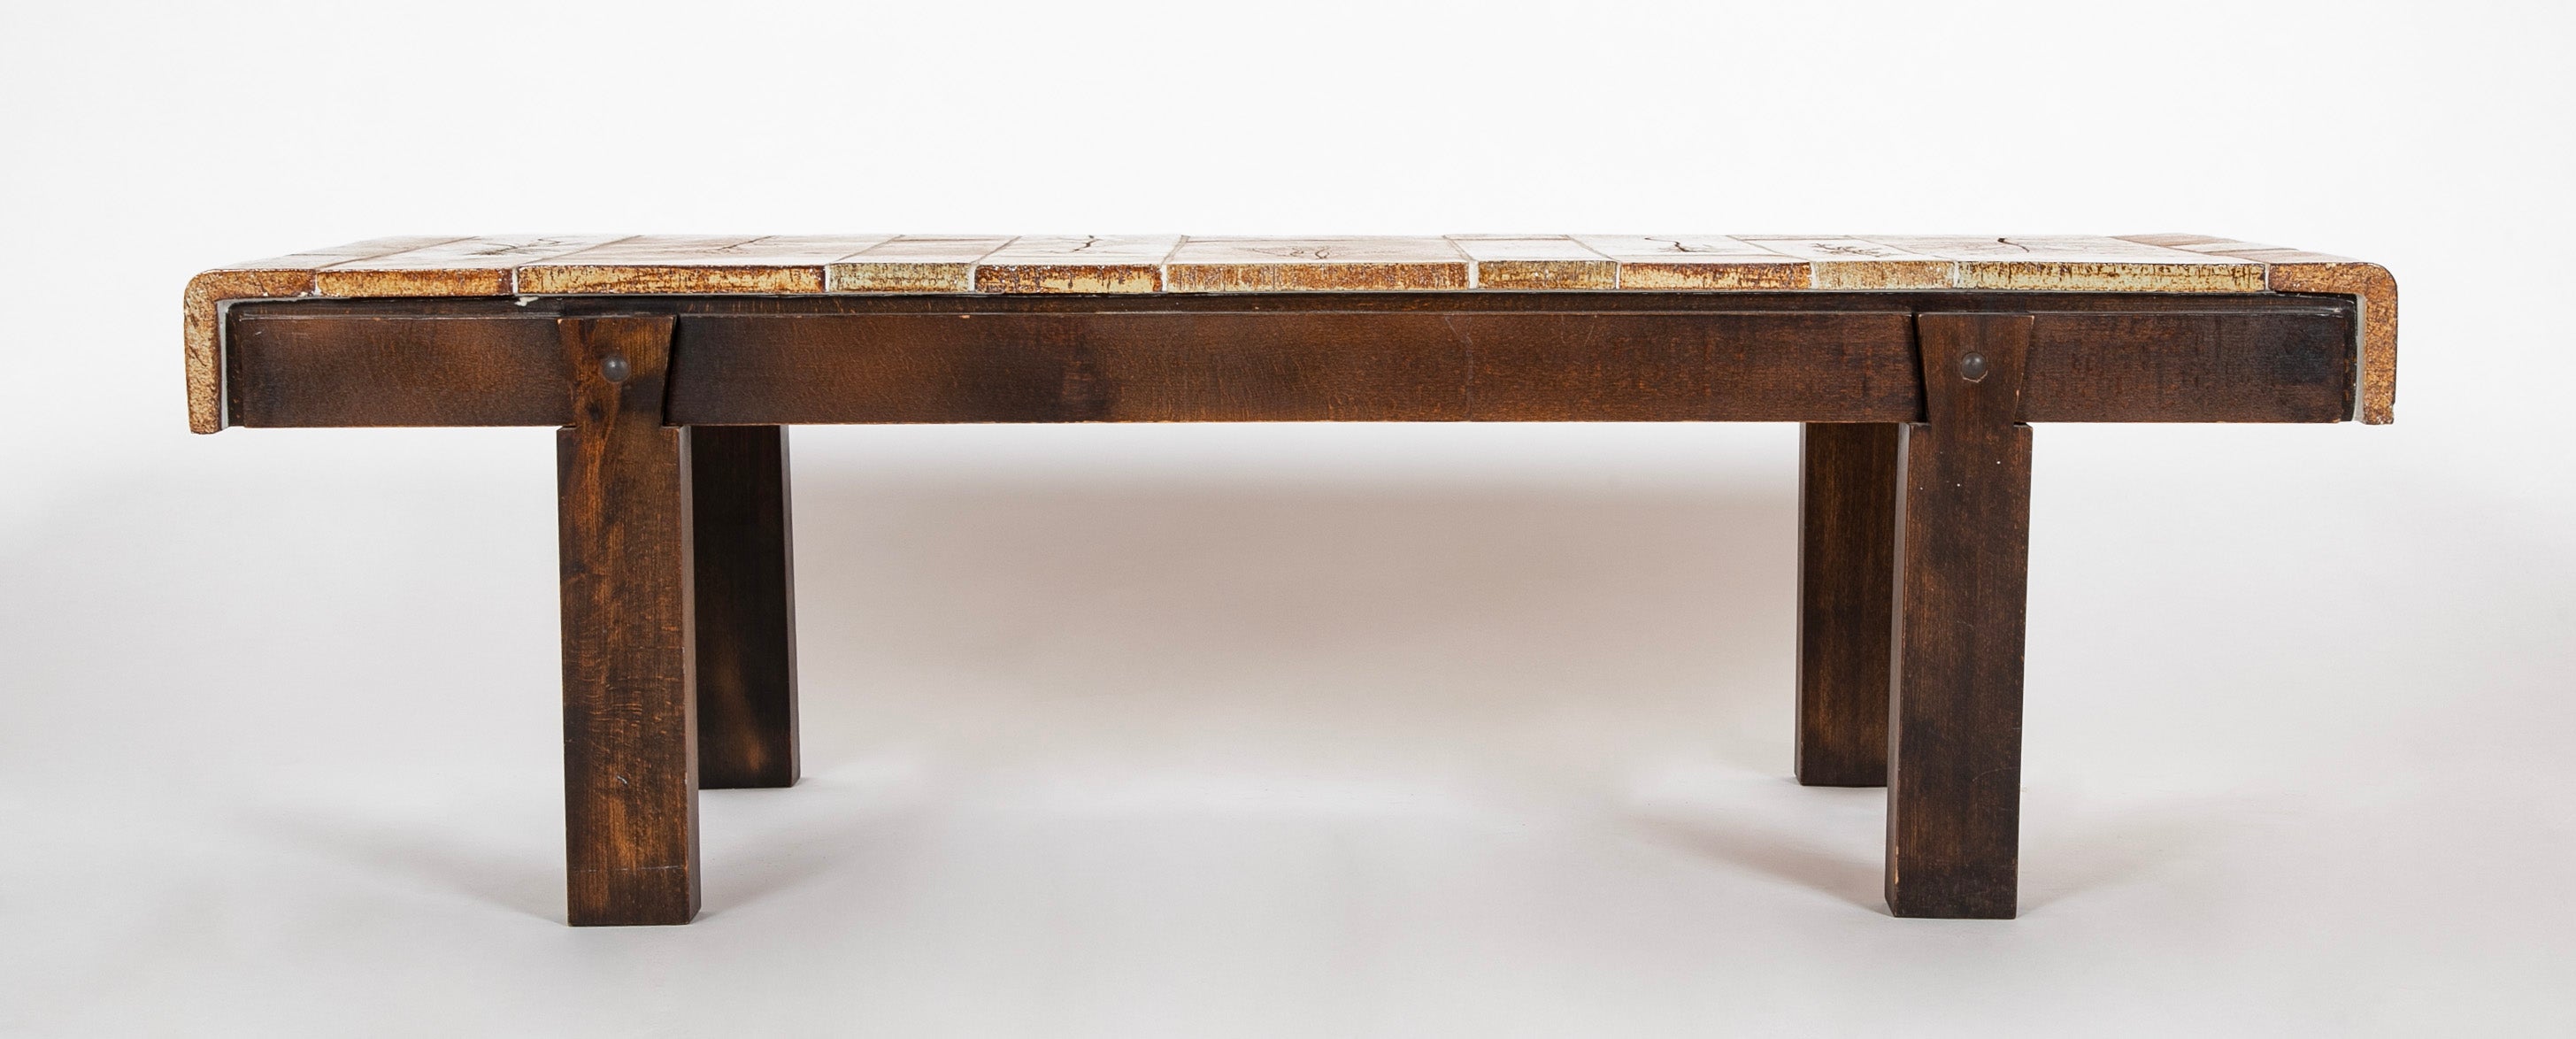 A Roger Capron Coffee Table in Stained Wood & Glazed Ceramic Tile